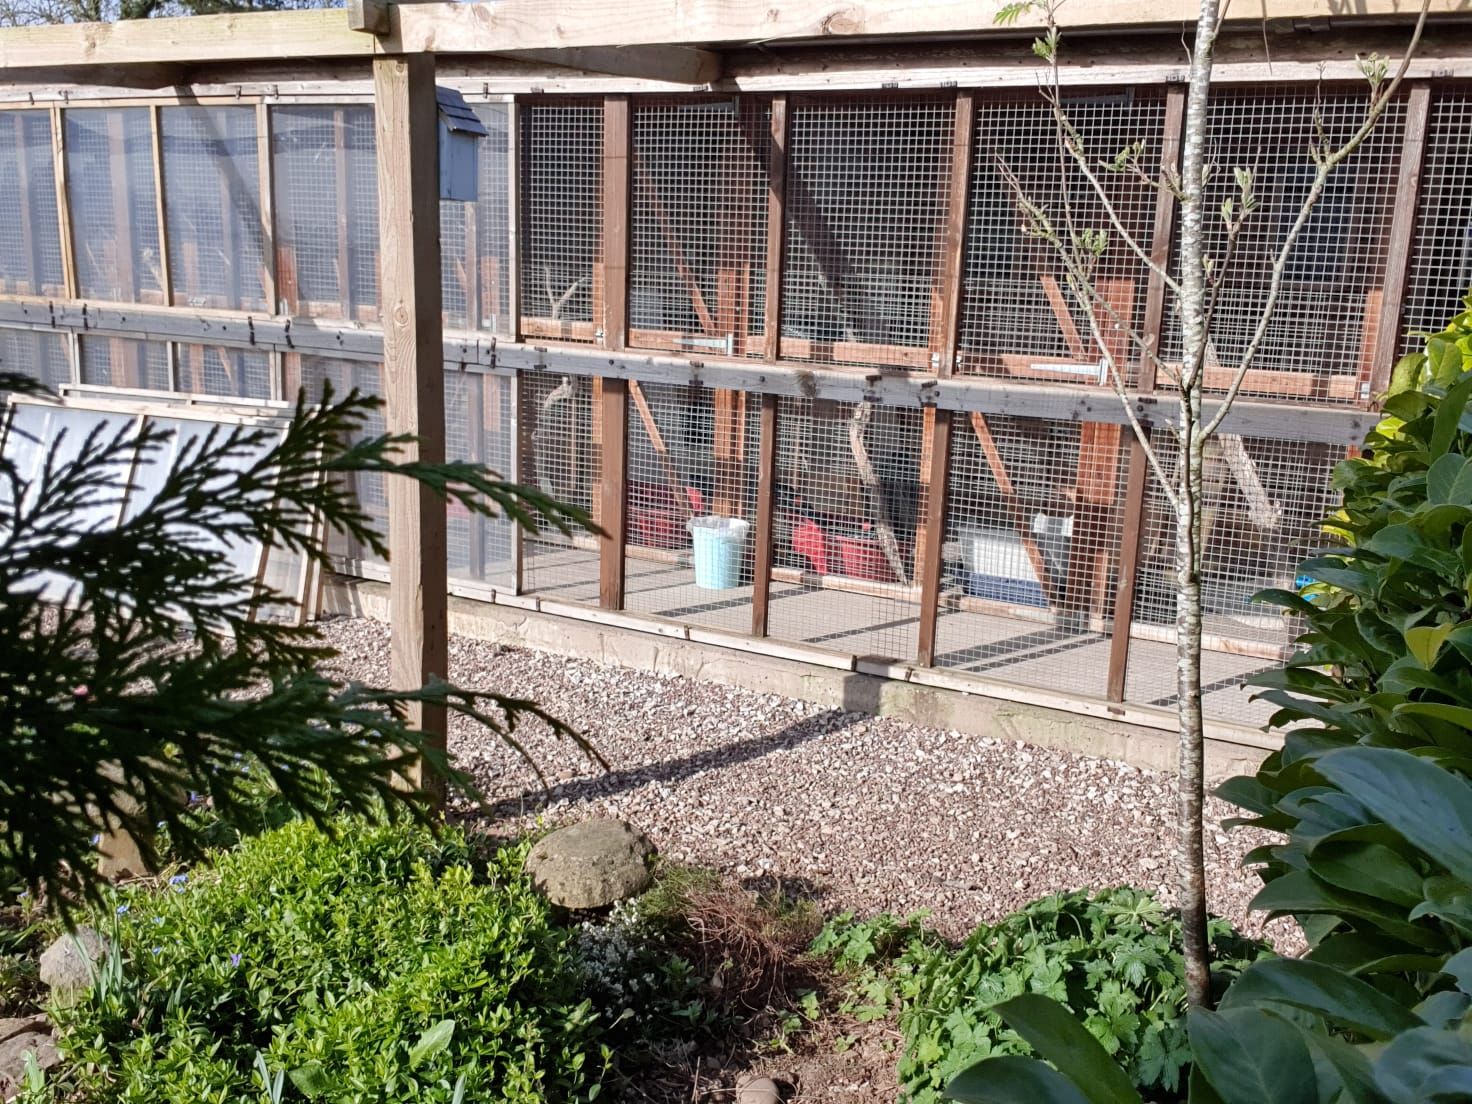 Our cattery looks out onto the garden on our rural Staffordshire property